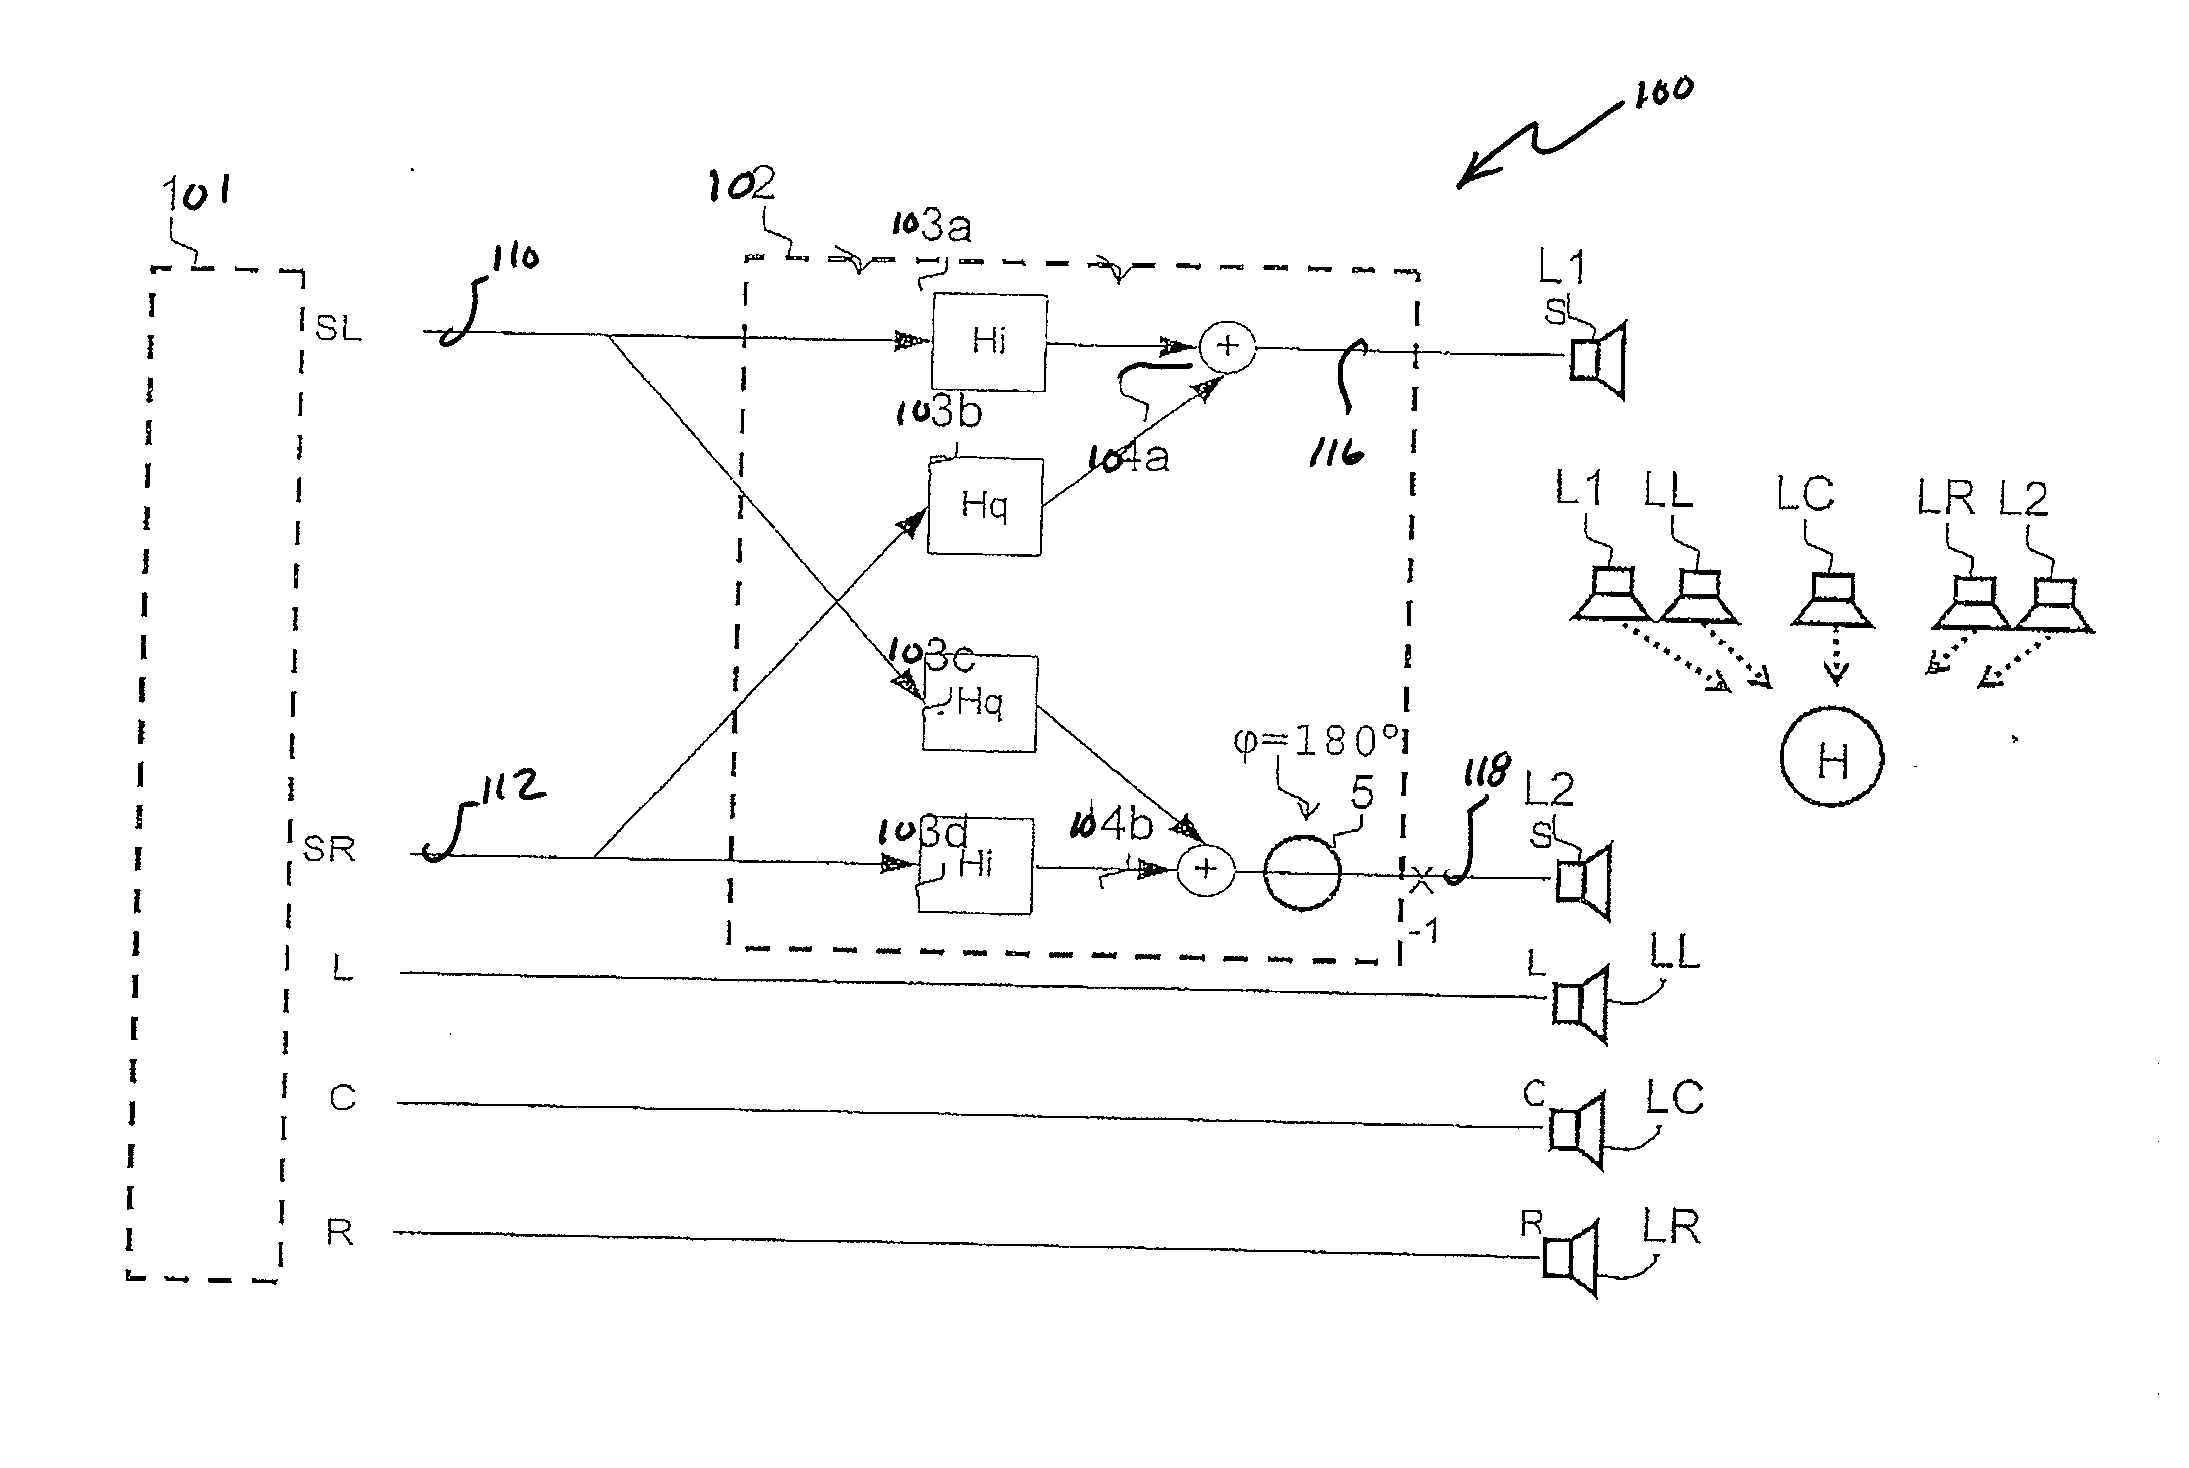 Device and Method for Producing a Surround Sound